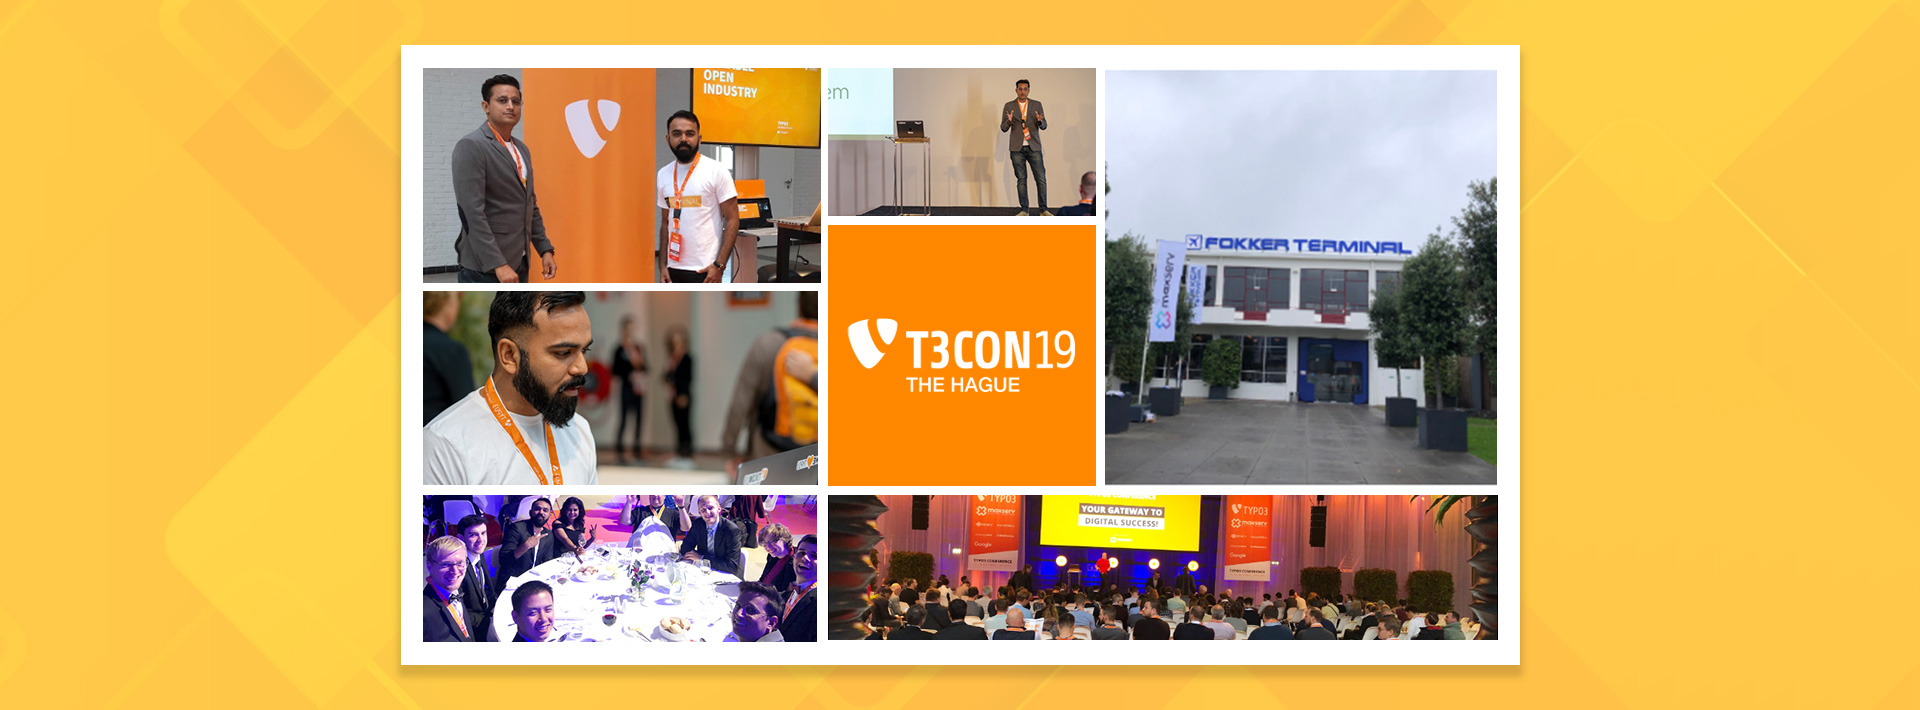 TYPO3 Conference 2019